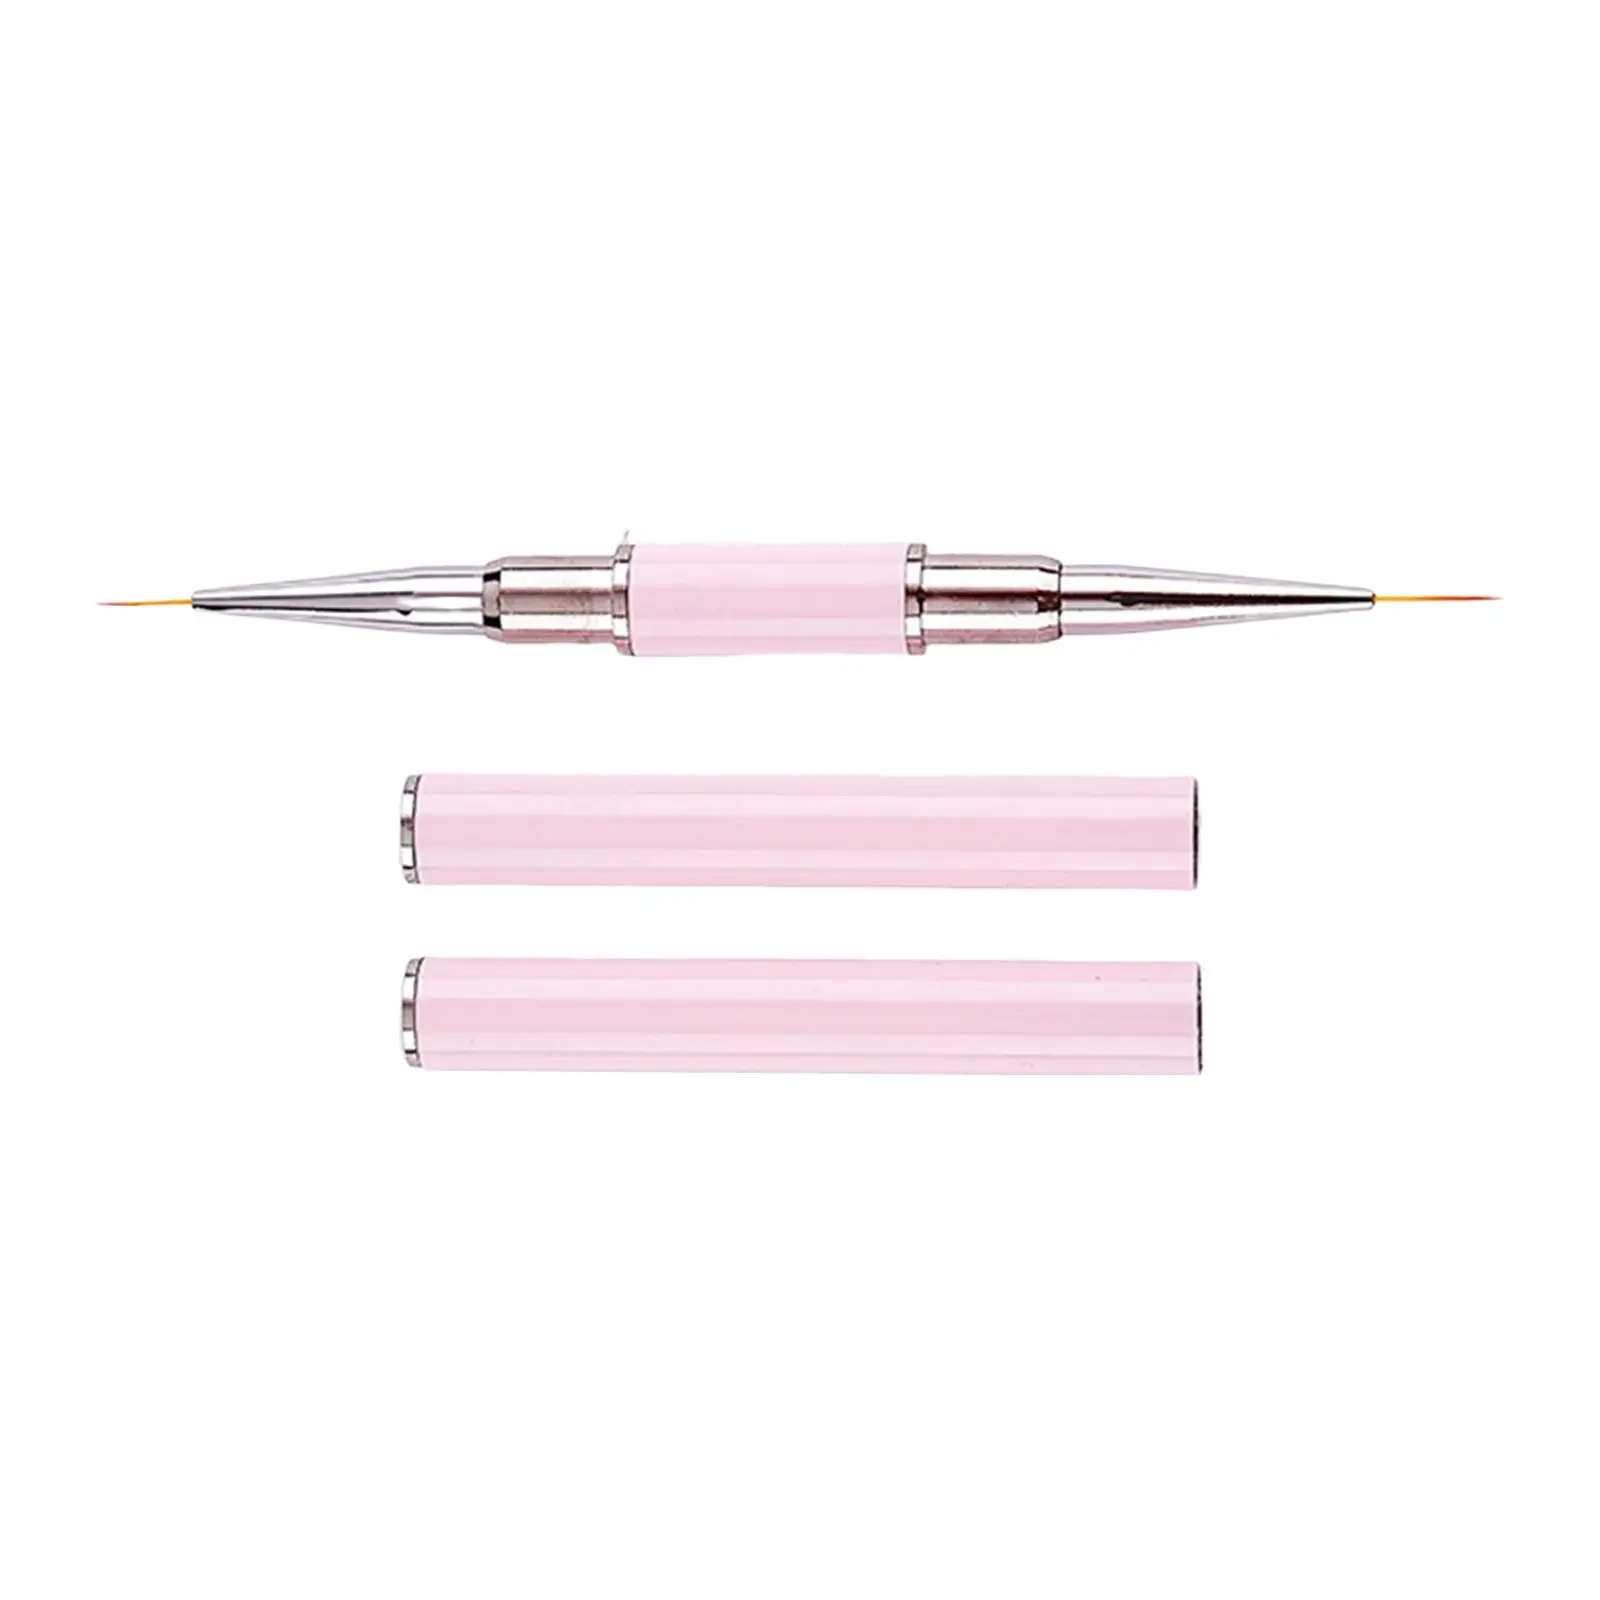 Nail Art Brushes Nail Drawing Pens for Thin Details Home Use Manicure Decoration Brushes Set Elongated Lines DIY Manicure Salon